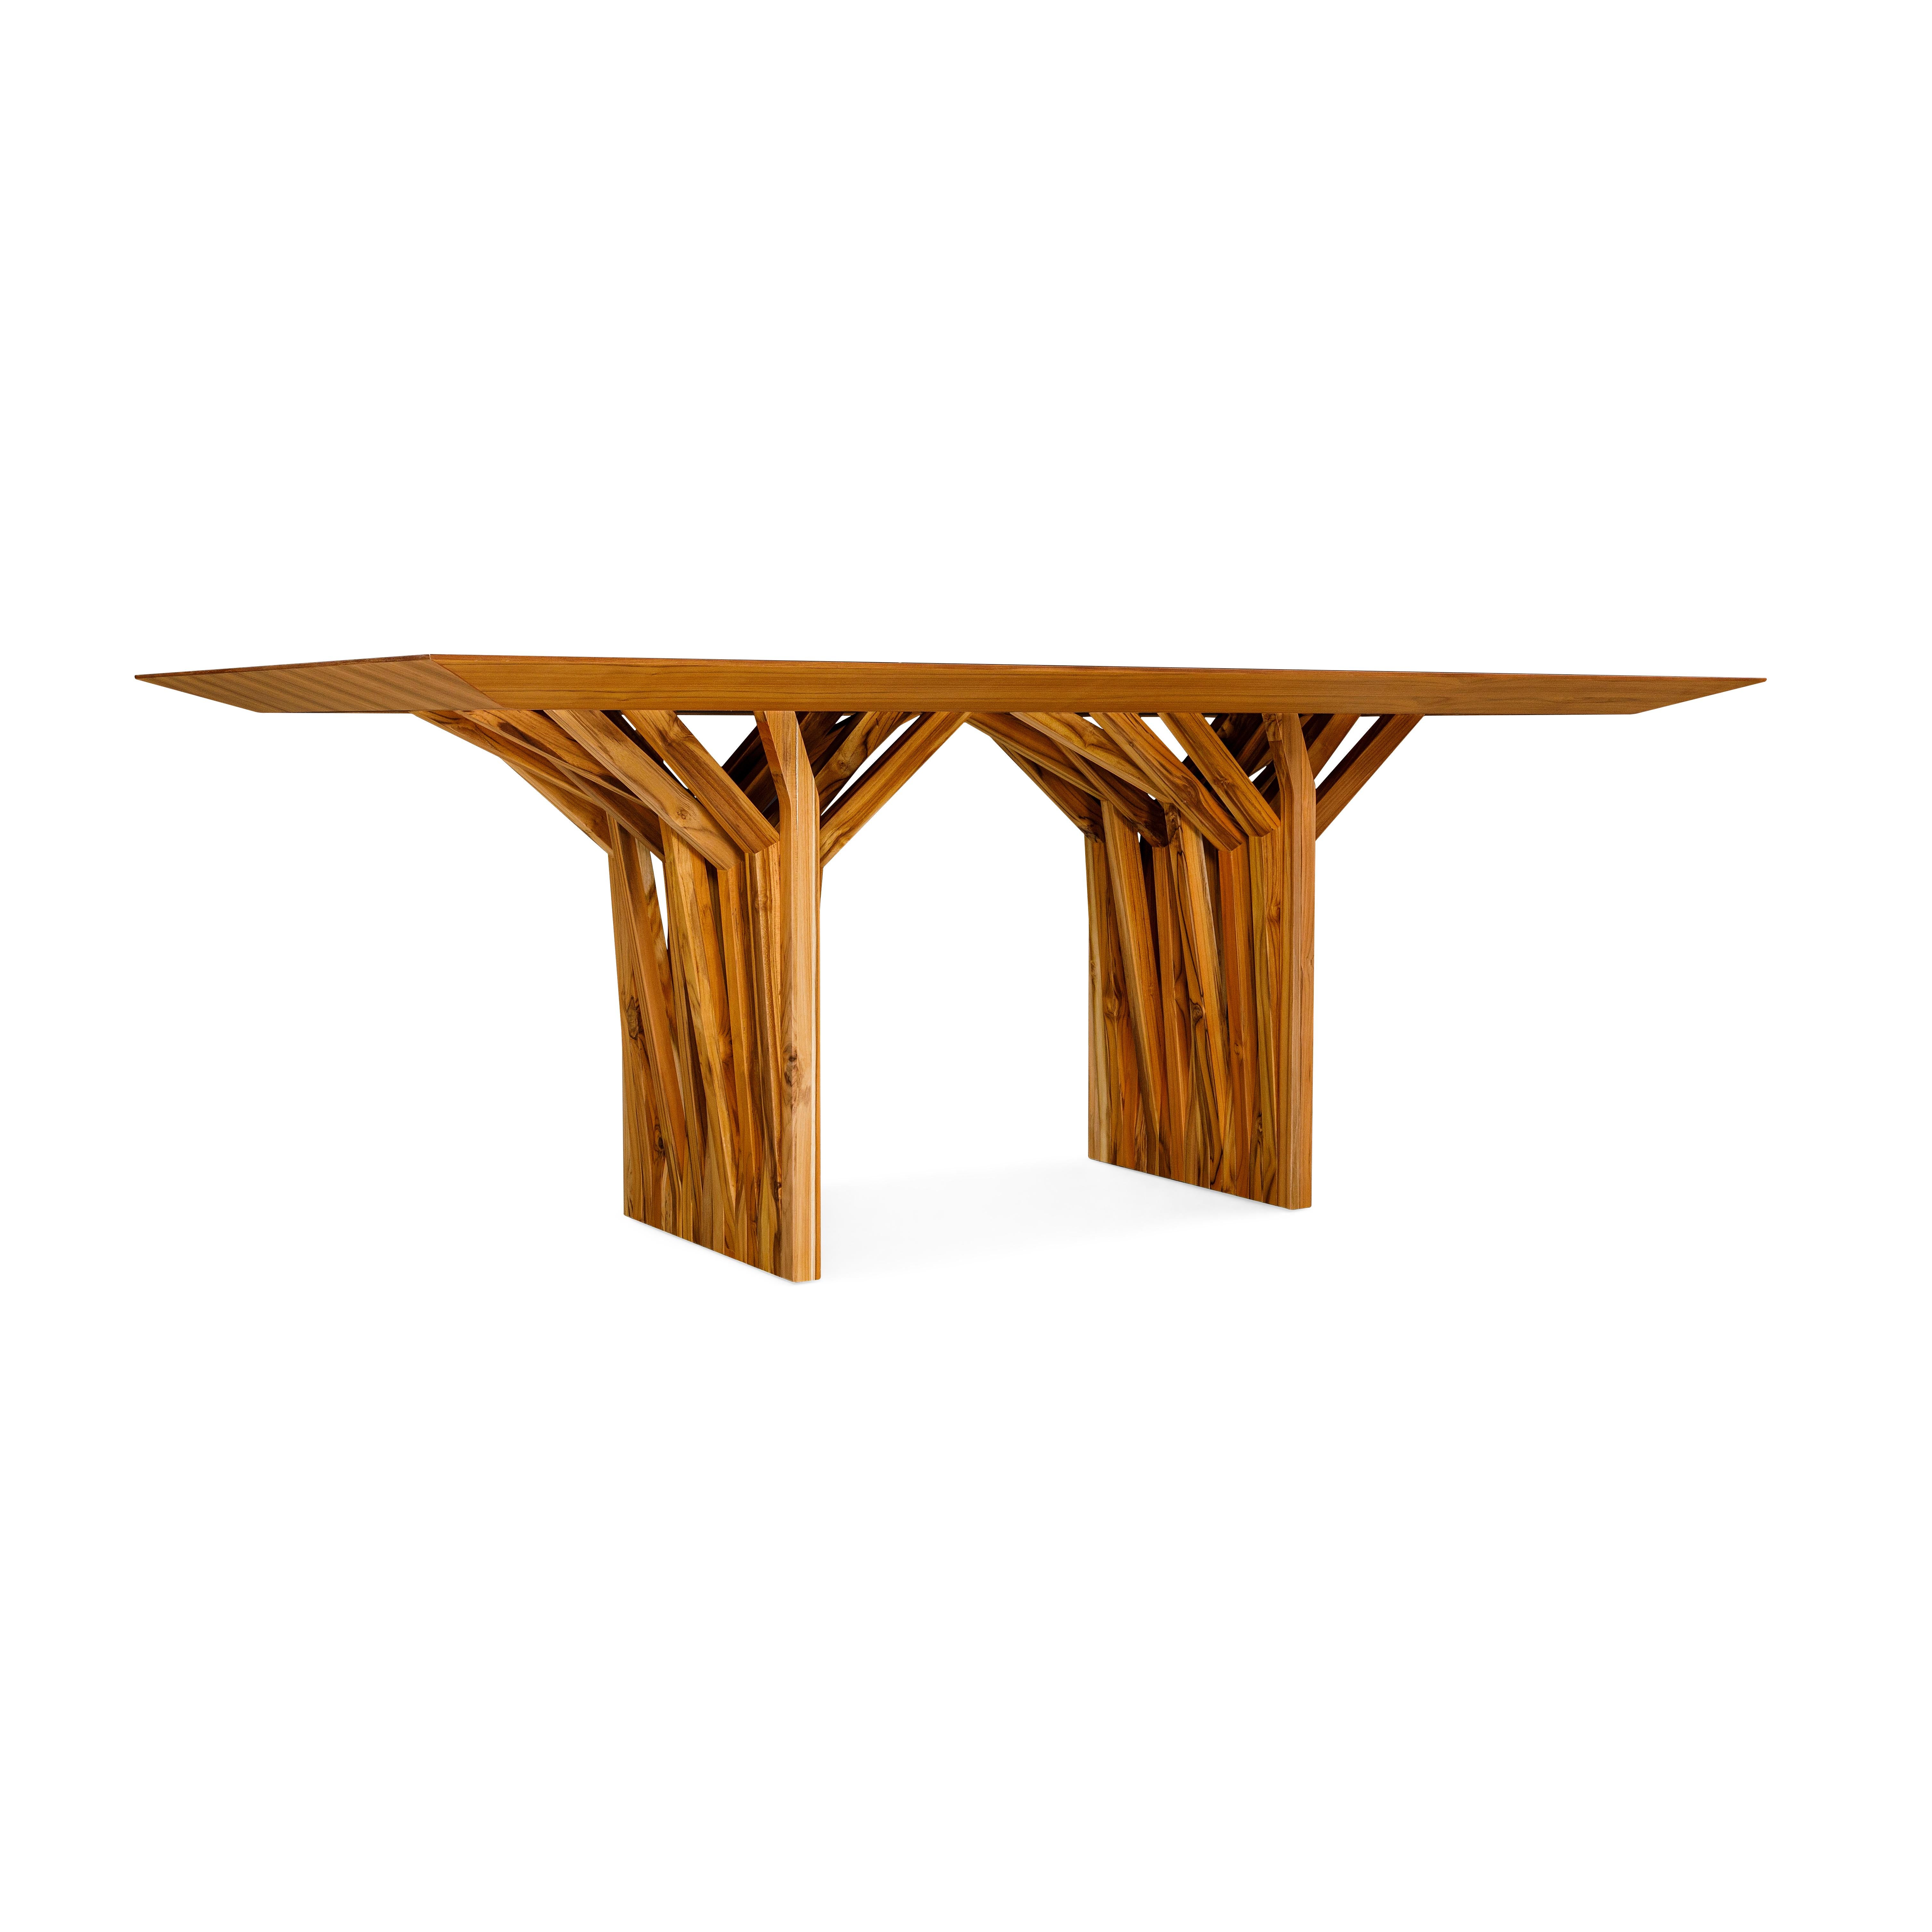 Contemporary Radi Dining Table with a Teak Wood Veneered Table Top 78'' For Sale